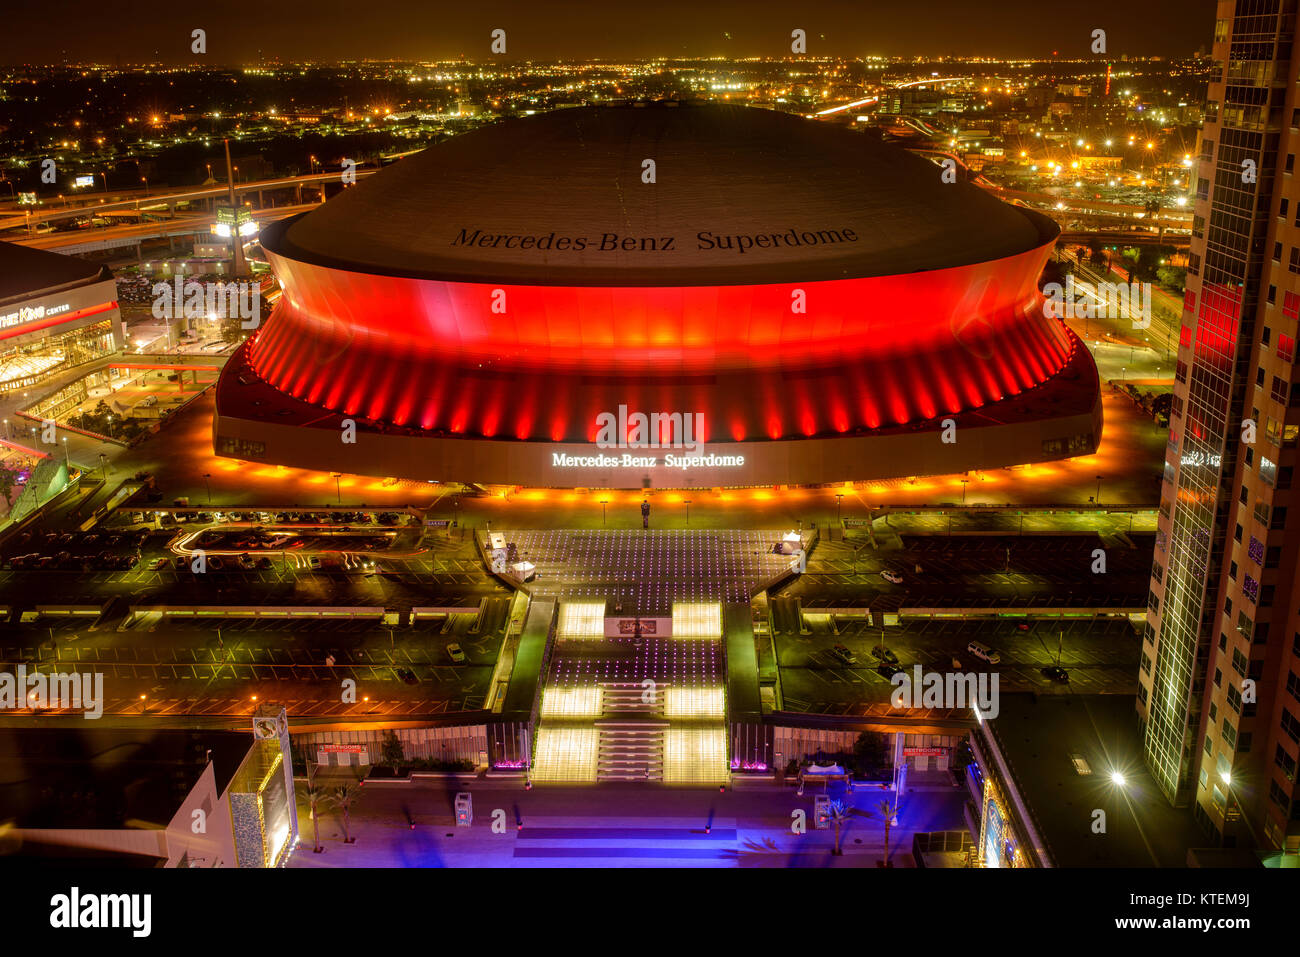 Superdome in Red - At night, Mercedes-Benz Superdome, the home stadium of New Orleans Saints football team, is lit up by bright and colorful lights. Stock Photo